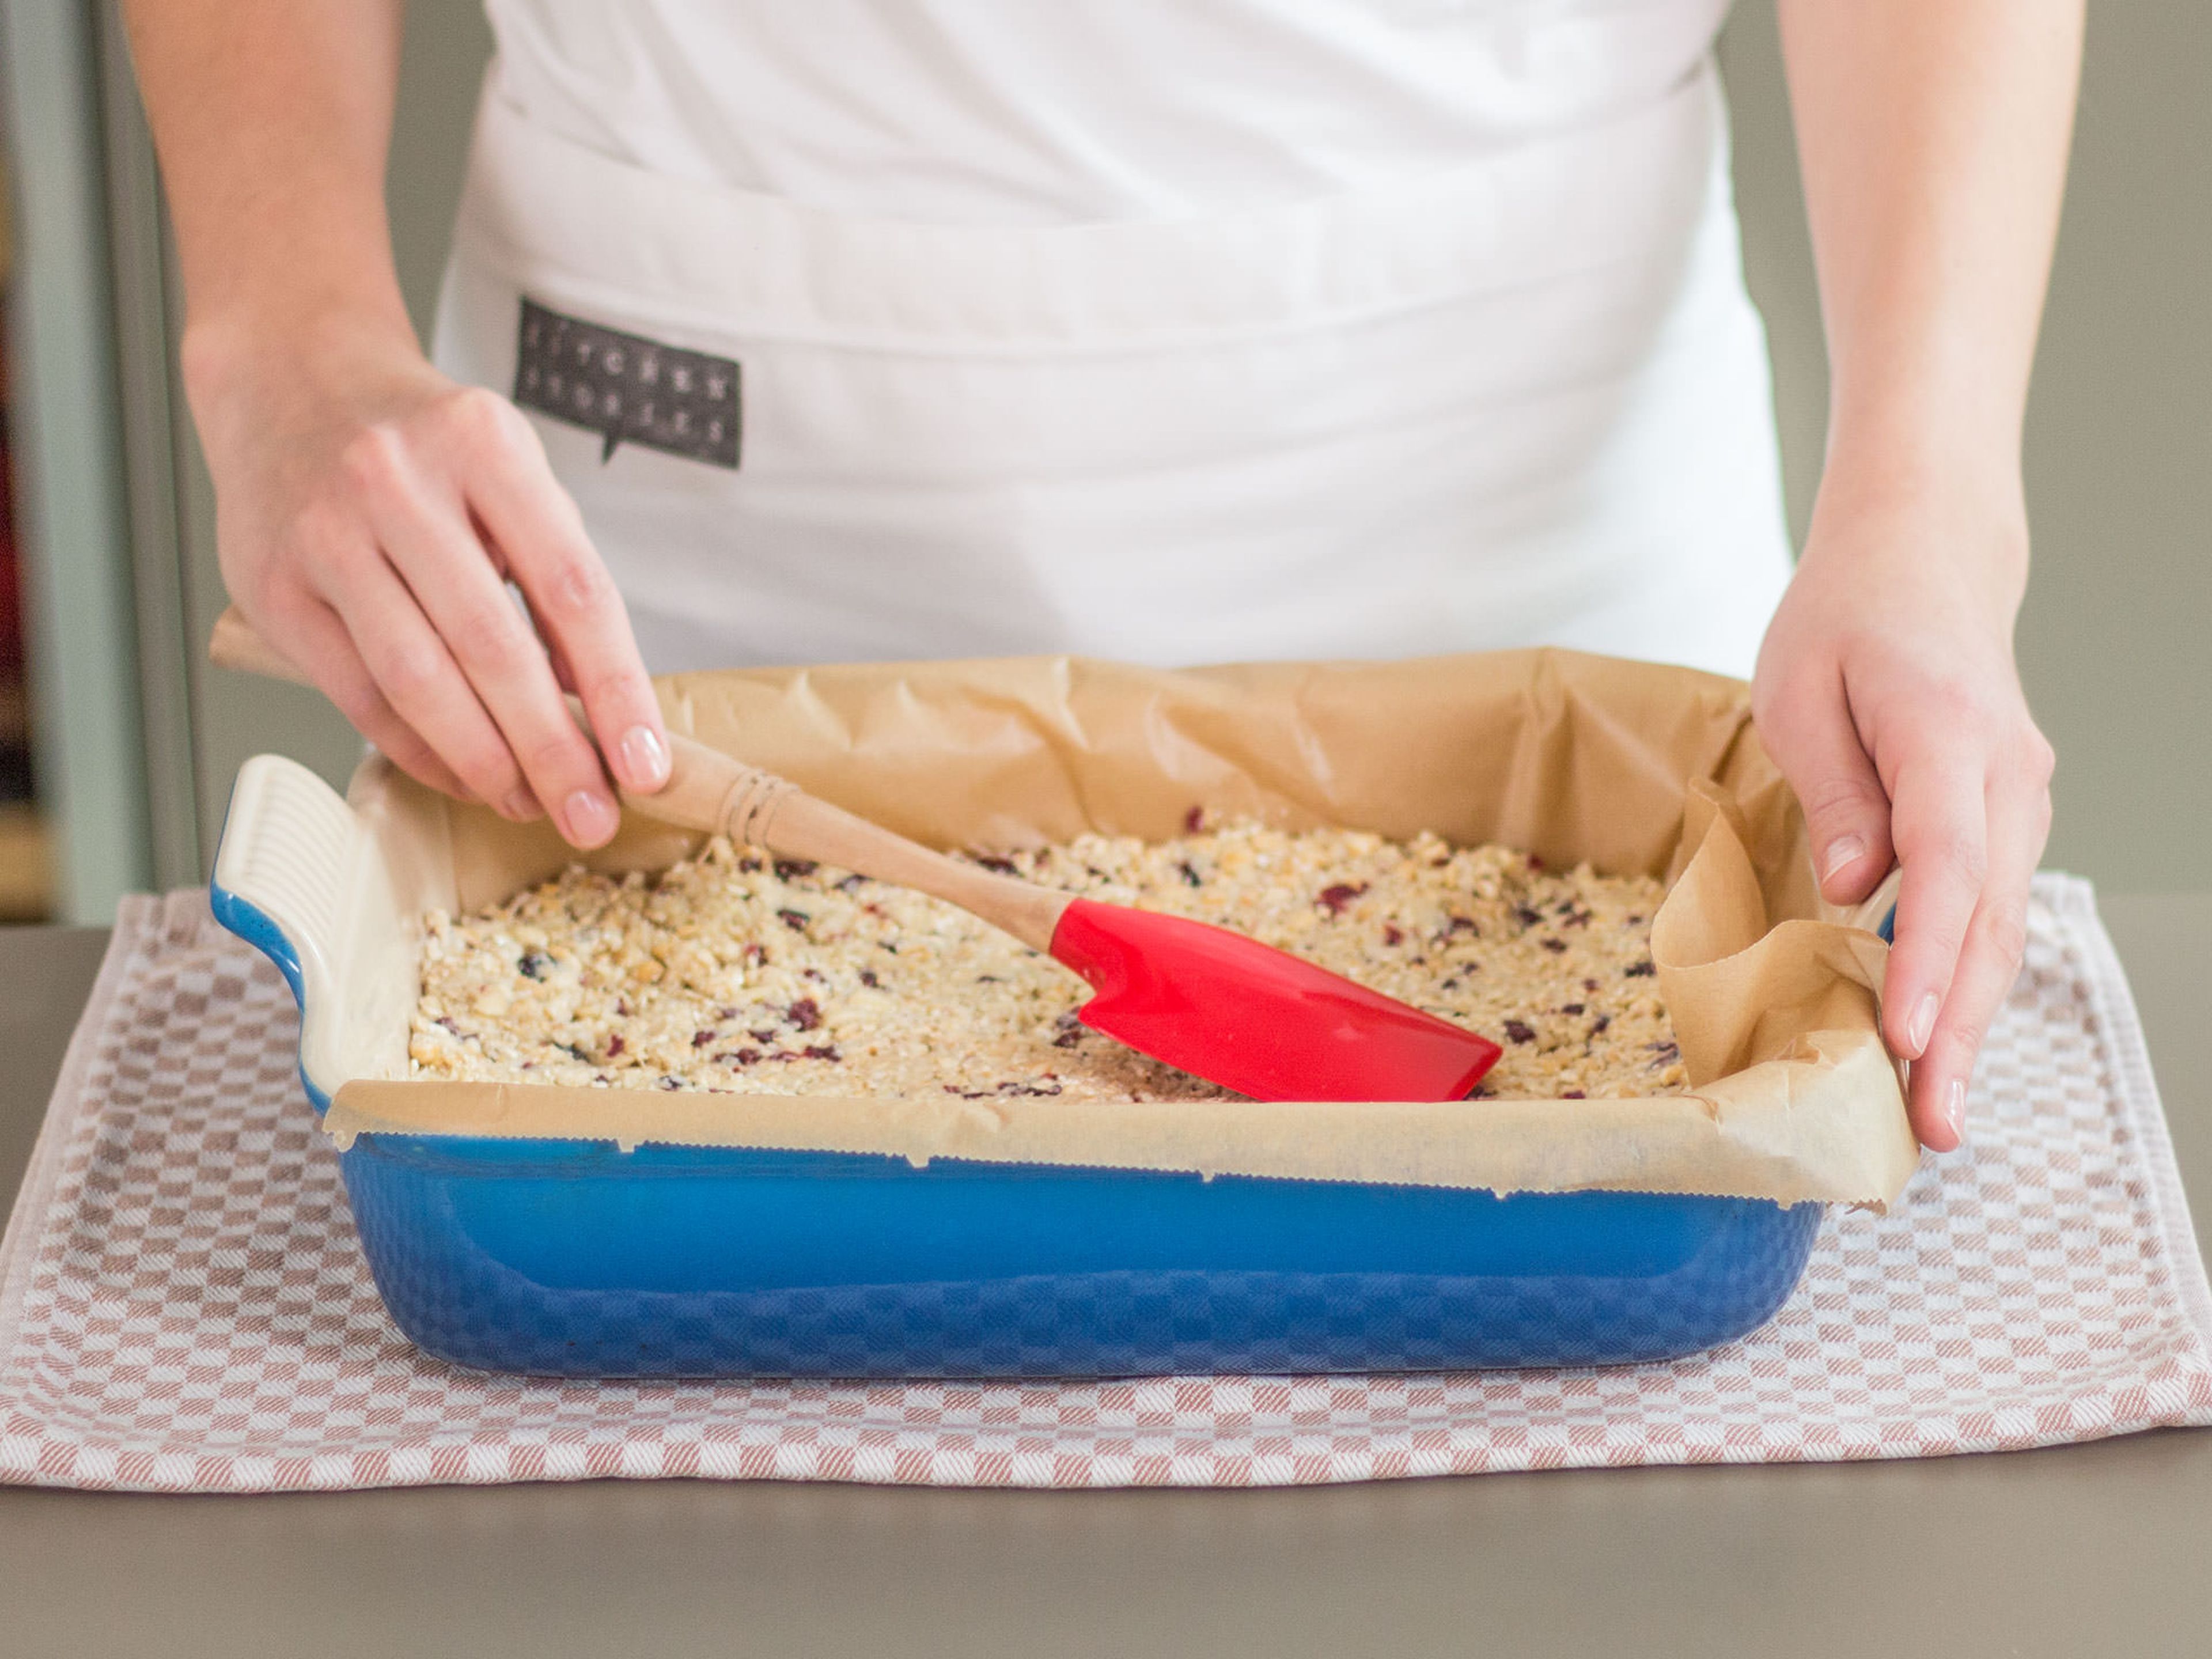 Transfer breakfast bar mixture to a parchment-lined baking dish and smooth top with a spatula. Place in preheated oven and bake at 130°C/270°F for approx. 45 – 50 min. until golden. Remove from oven and let cool for approx. 10 min.